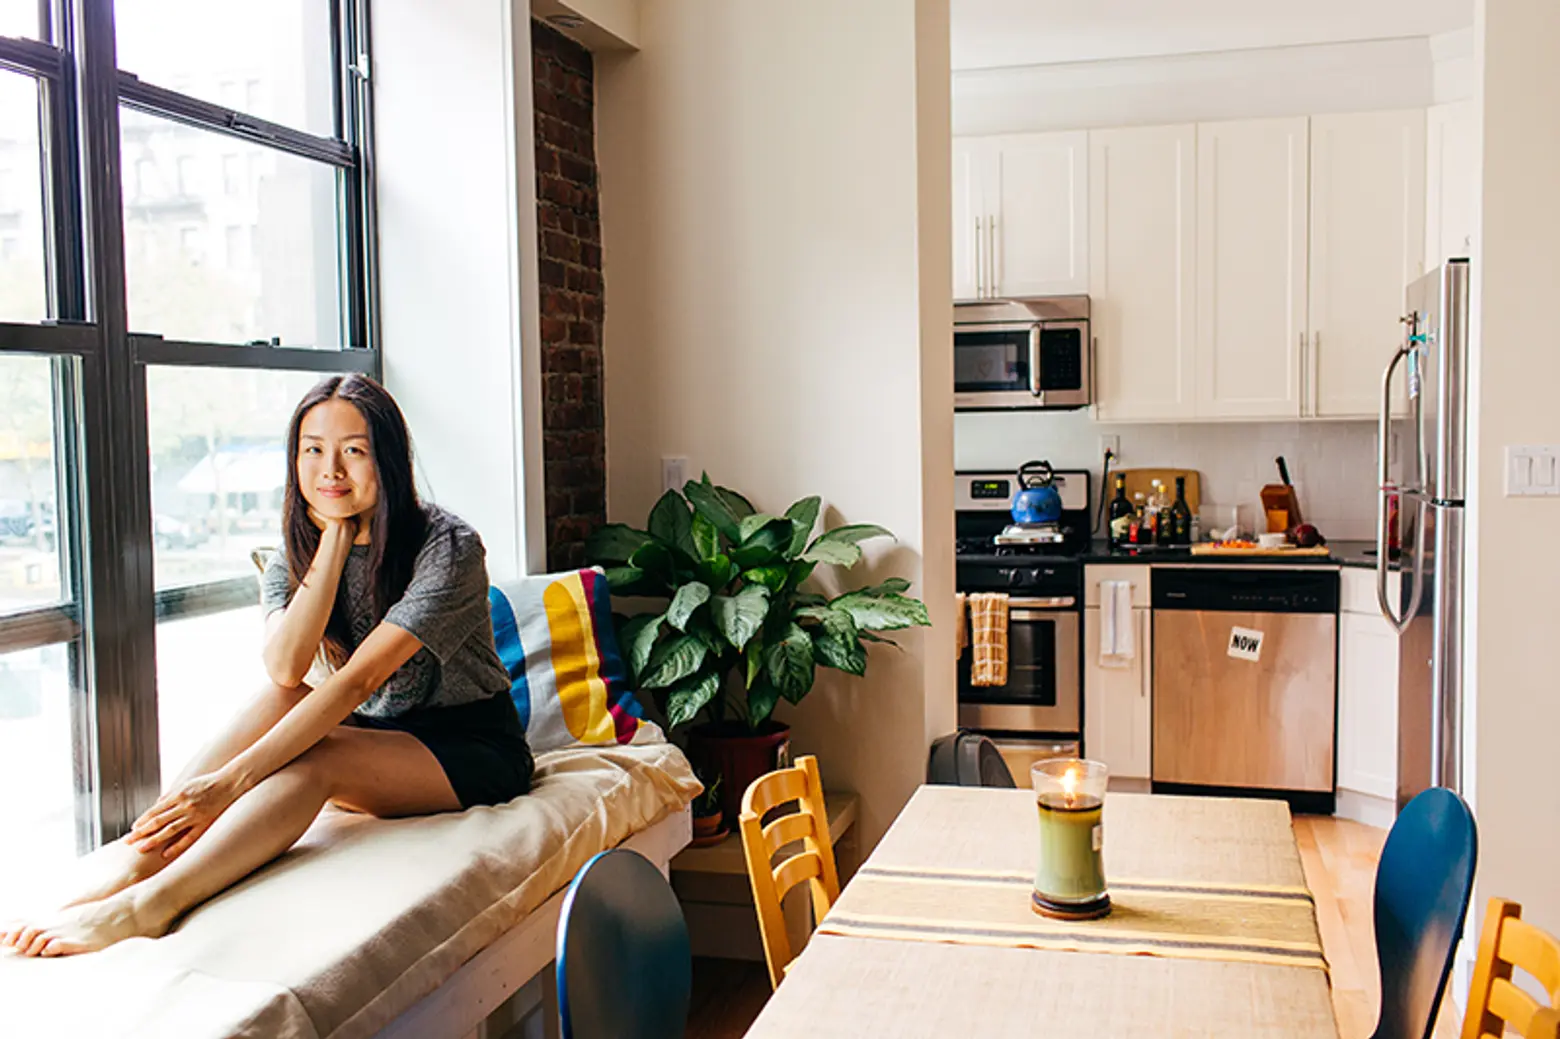 My sqft: A British Expat and Aspiring Food Vlogger Makes a Home in Hamilton Heights